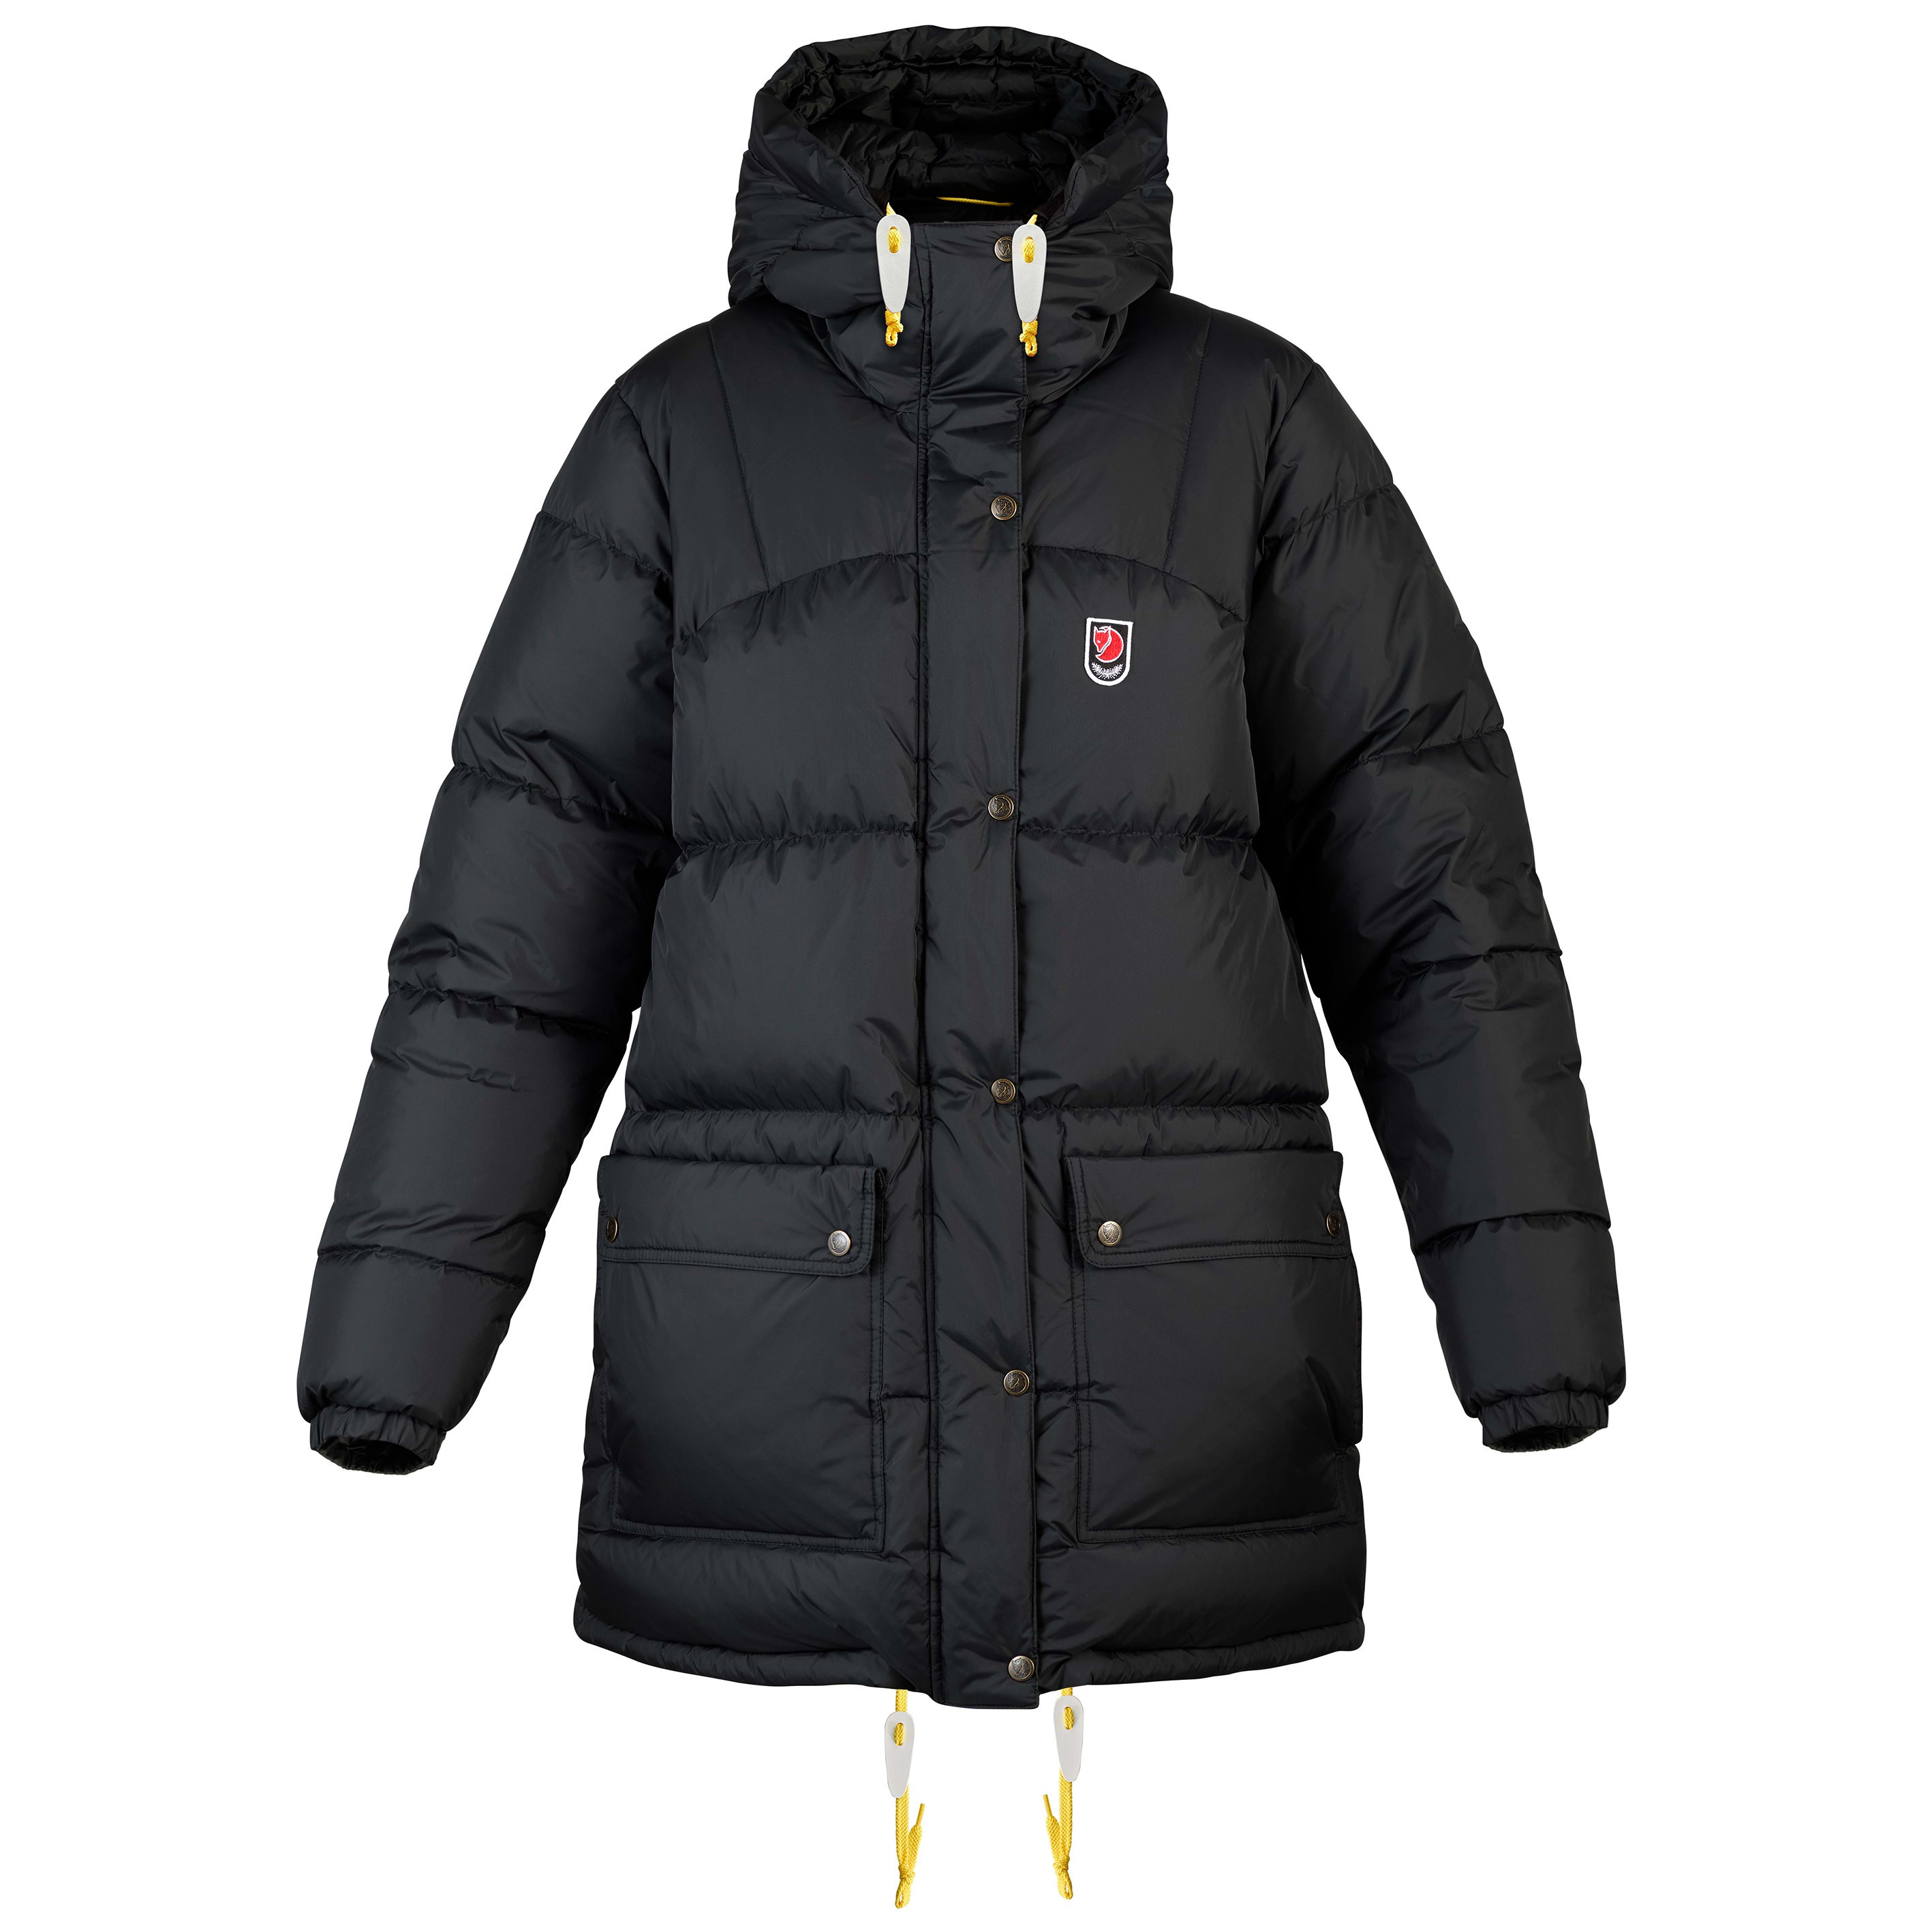 Køb Women's Expedition Down Jacket Outnorth